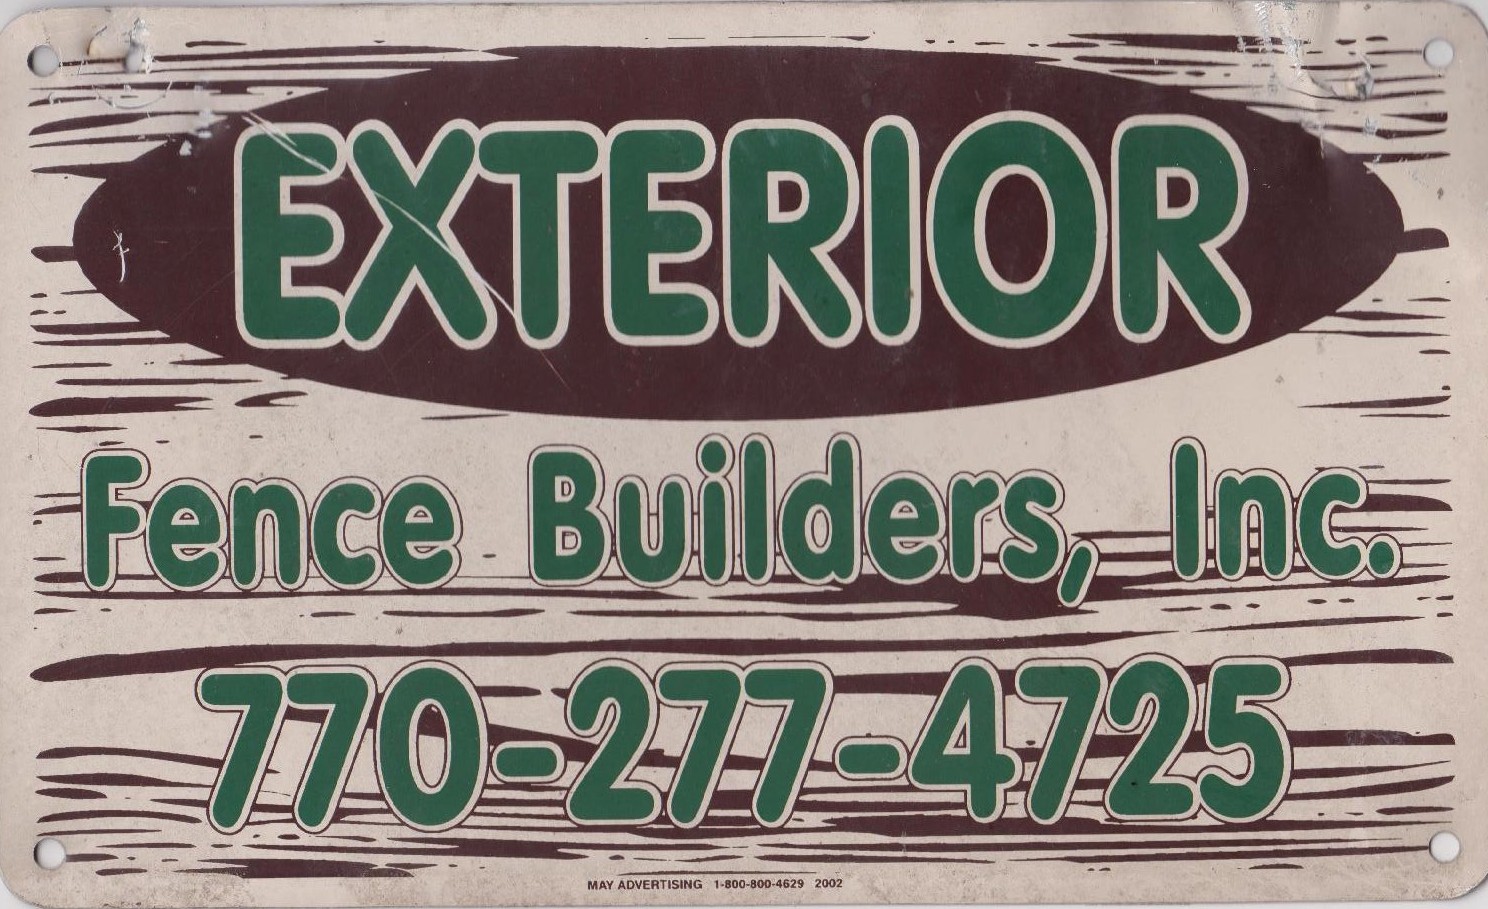 Exterior Fence Builders, Inc. Fence sign for 1999 to 2009. during this time were also operationing under the name of Keep on Fencing